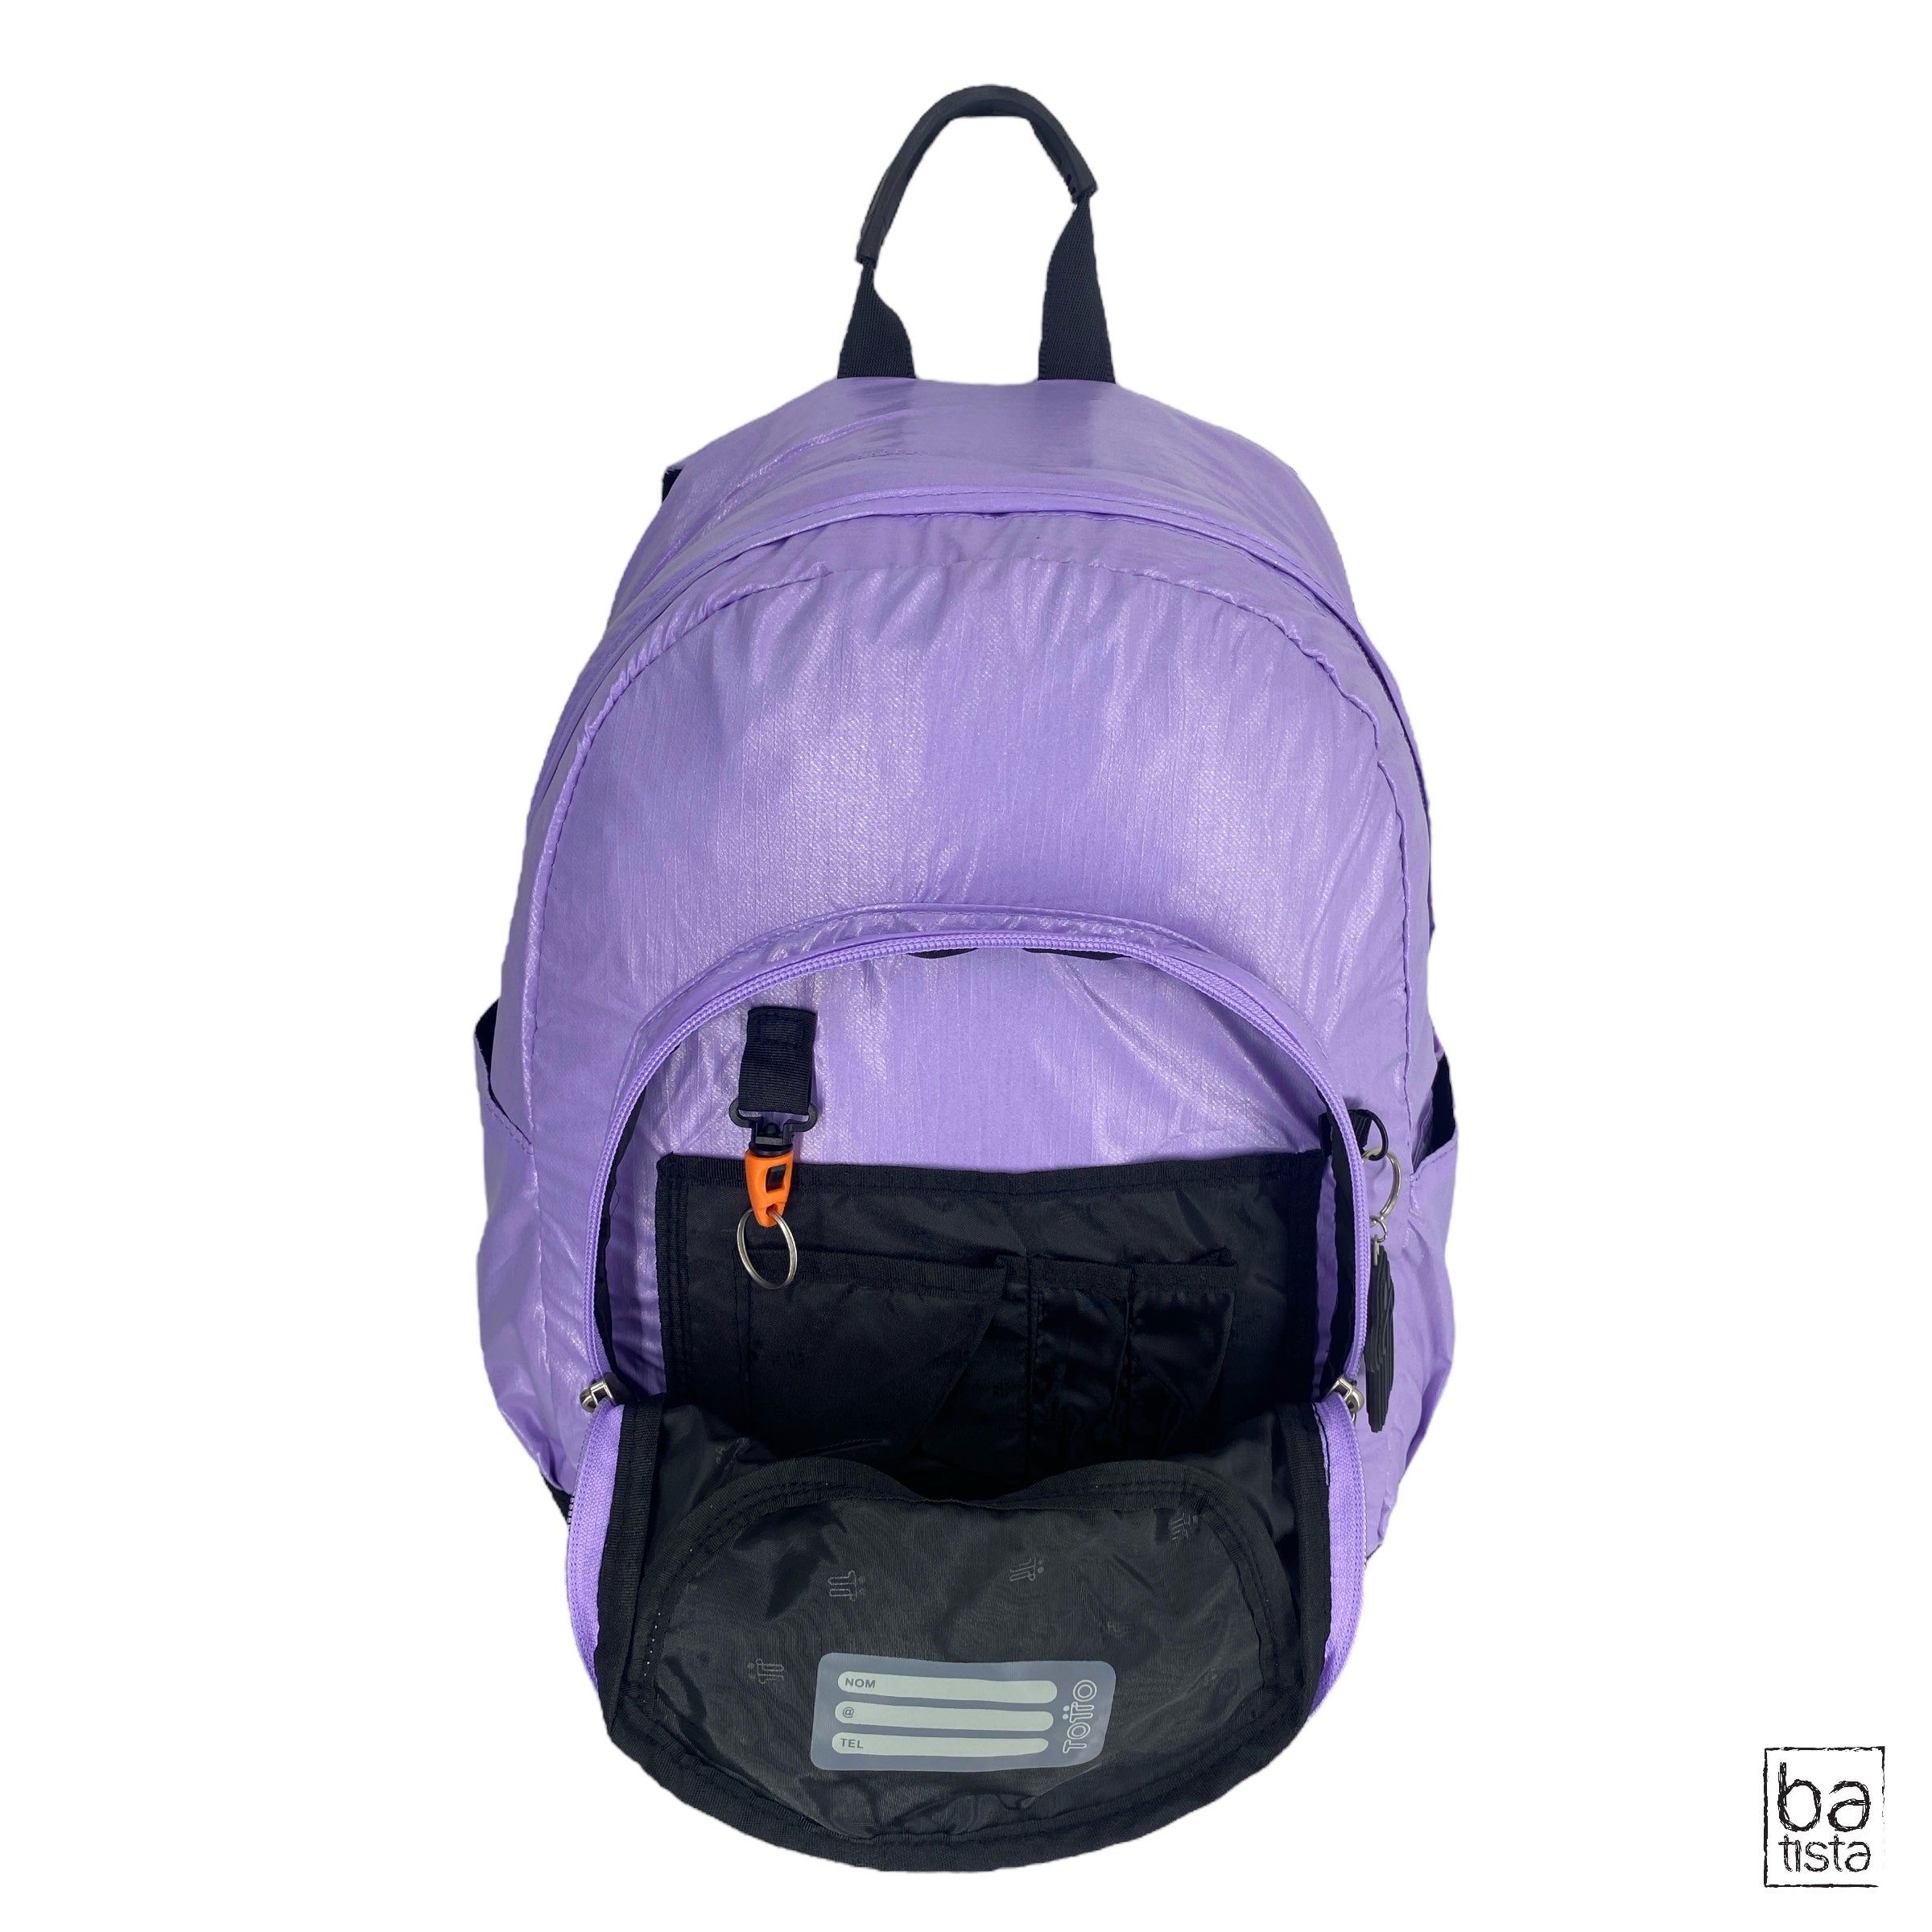 Morral Totto Gommel mediano 3QM